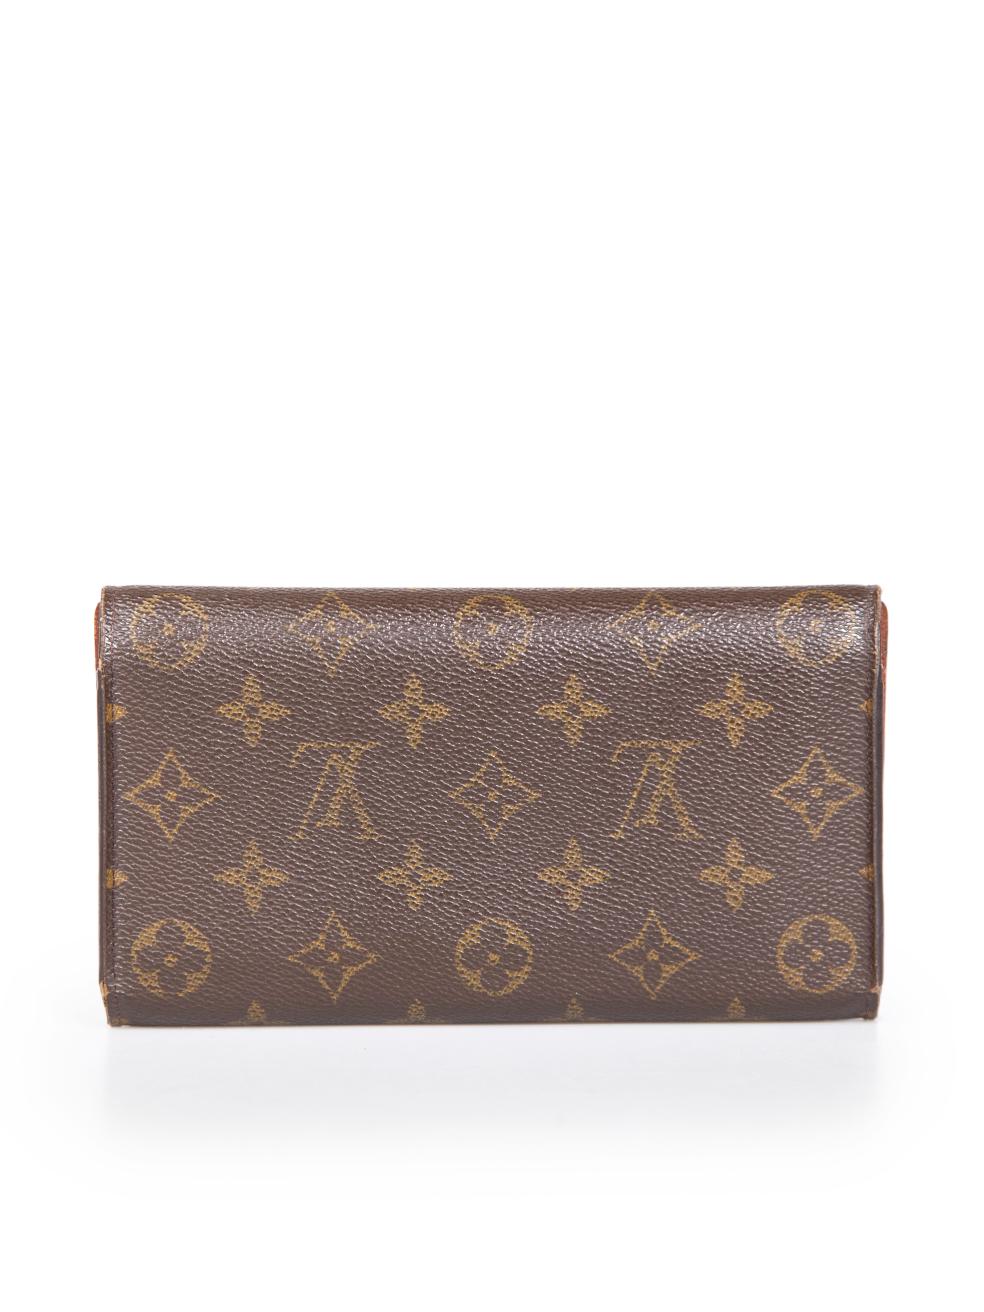 Louis Vuitton Vintage 2002 Brown Leather Monogram Sarah Wallet In Good Condition For Sale In London, GB